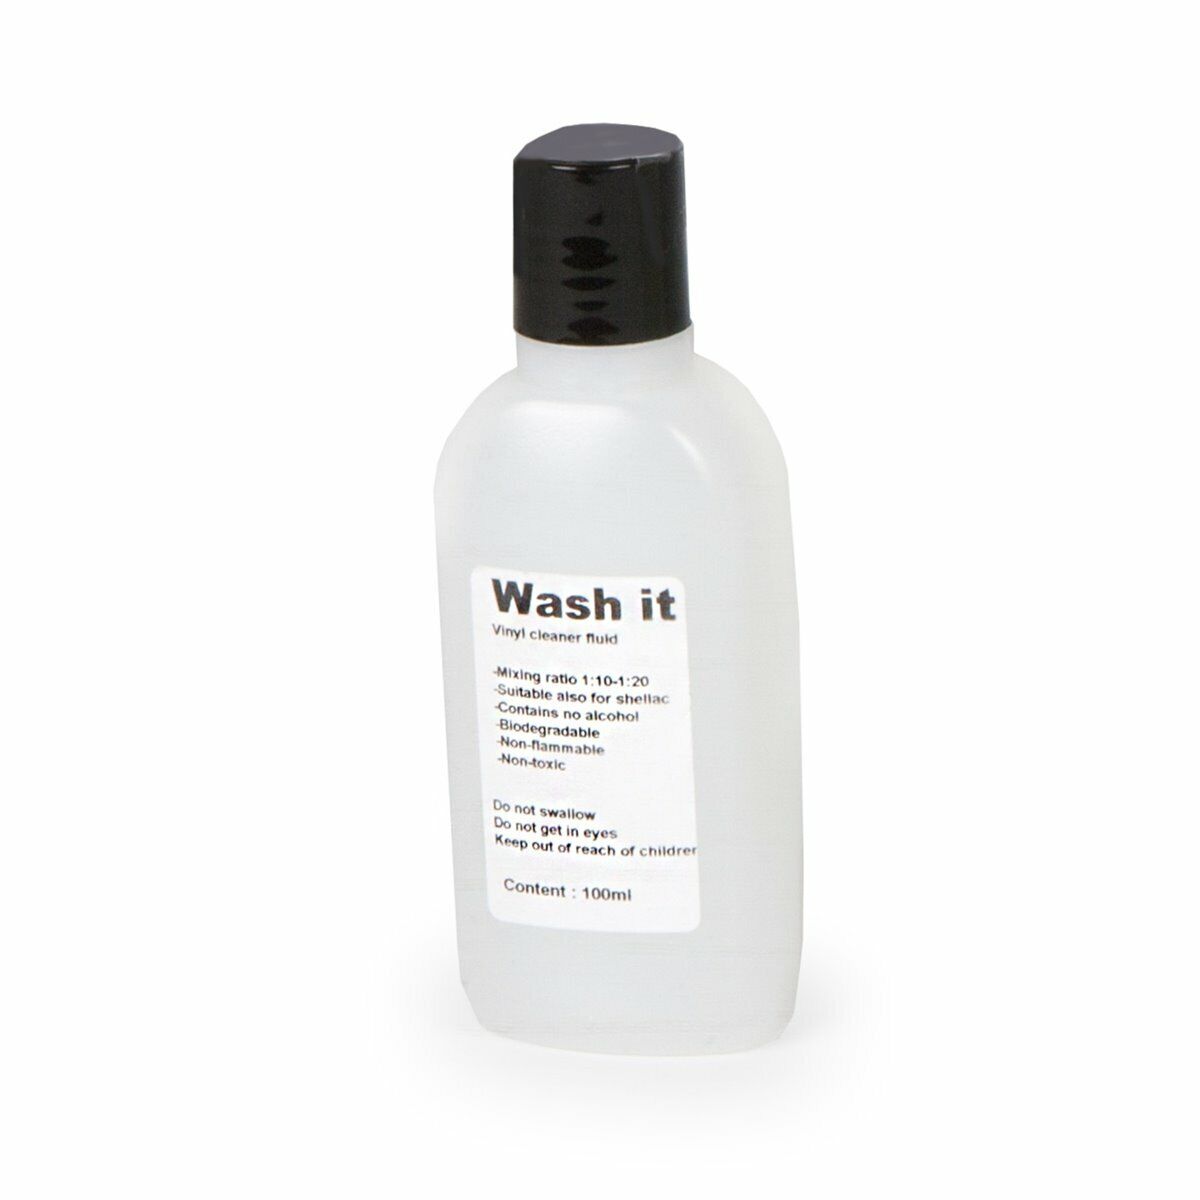 Pro-ject Wash It Cleaning Fluid For Record Cleaning Machine Vc-s 3.4oz